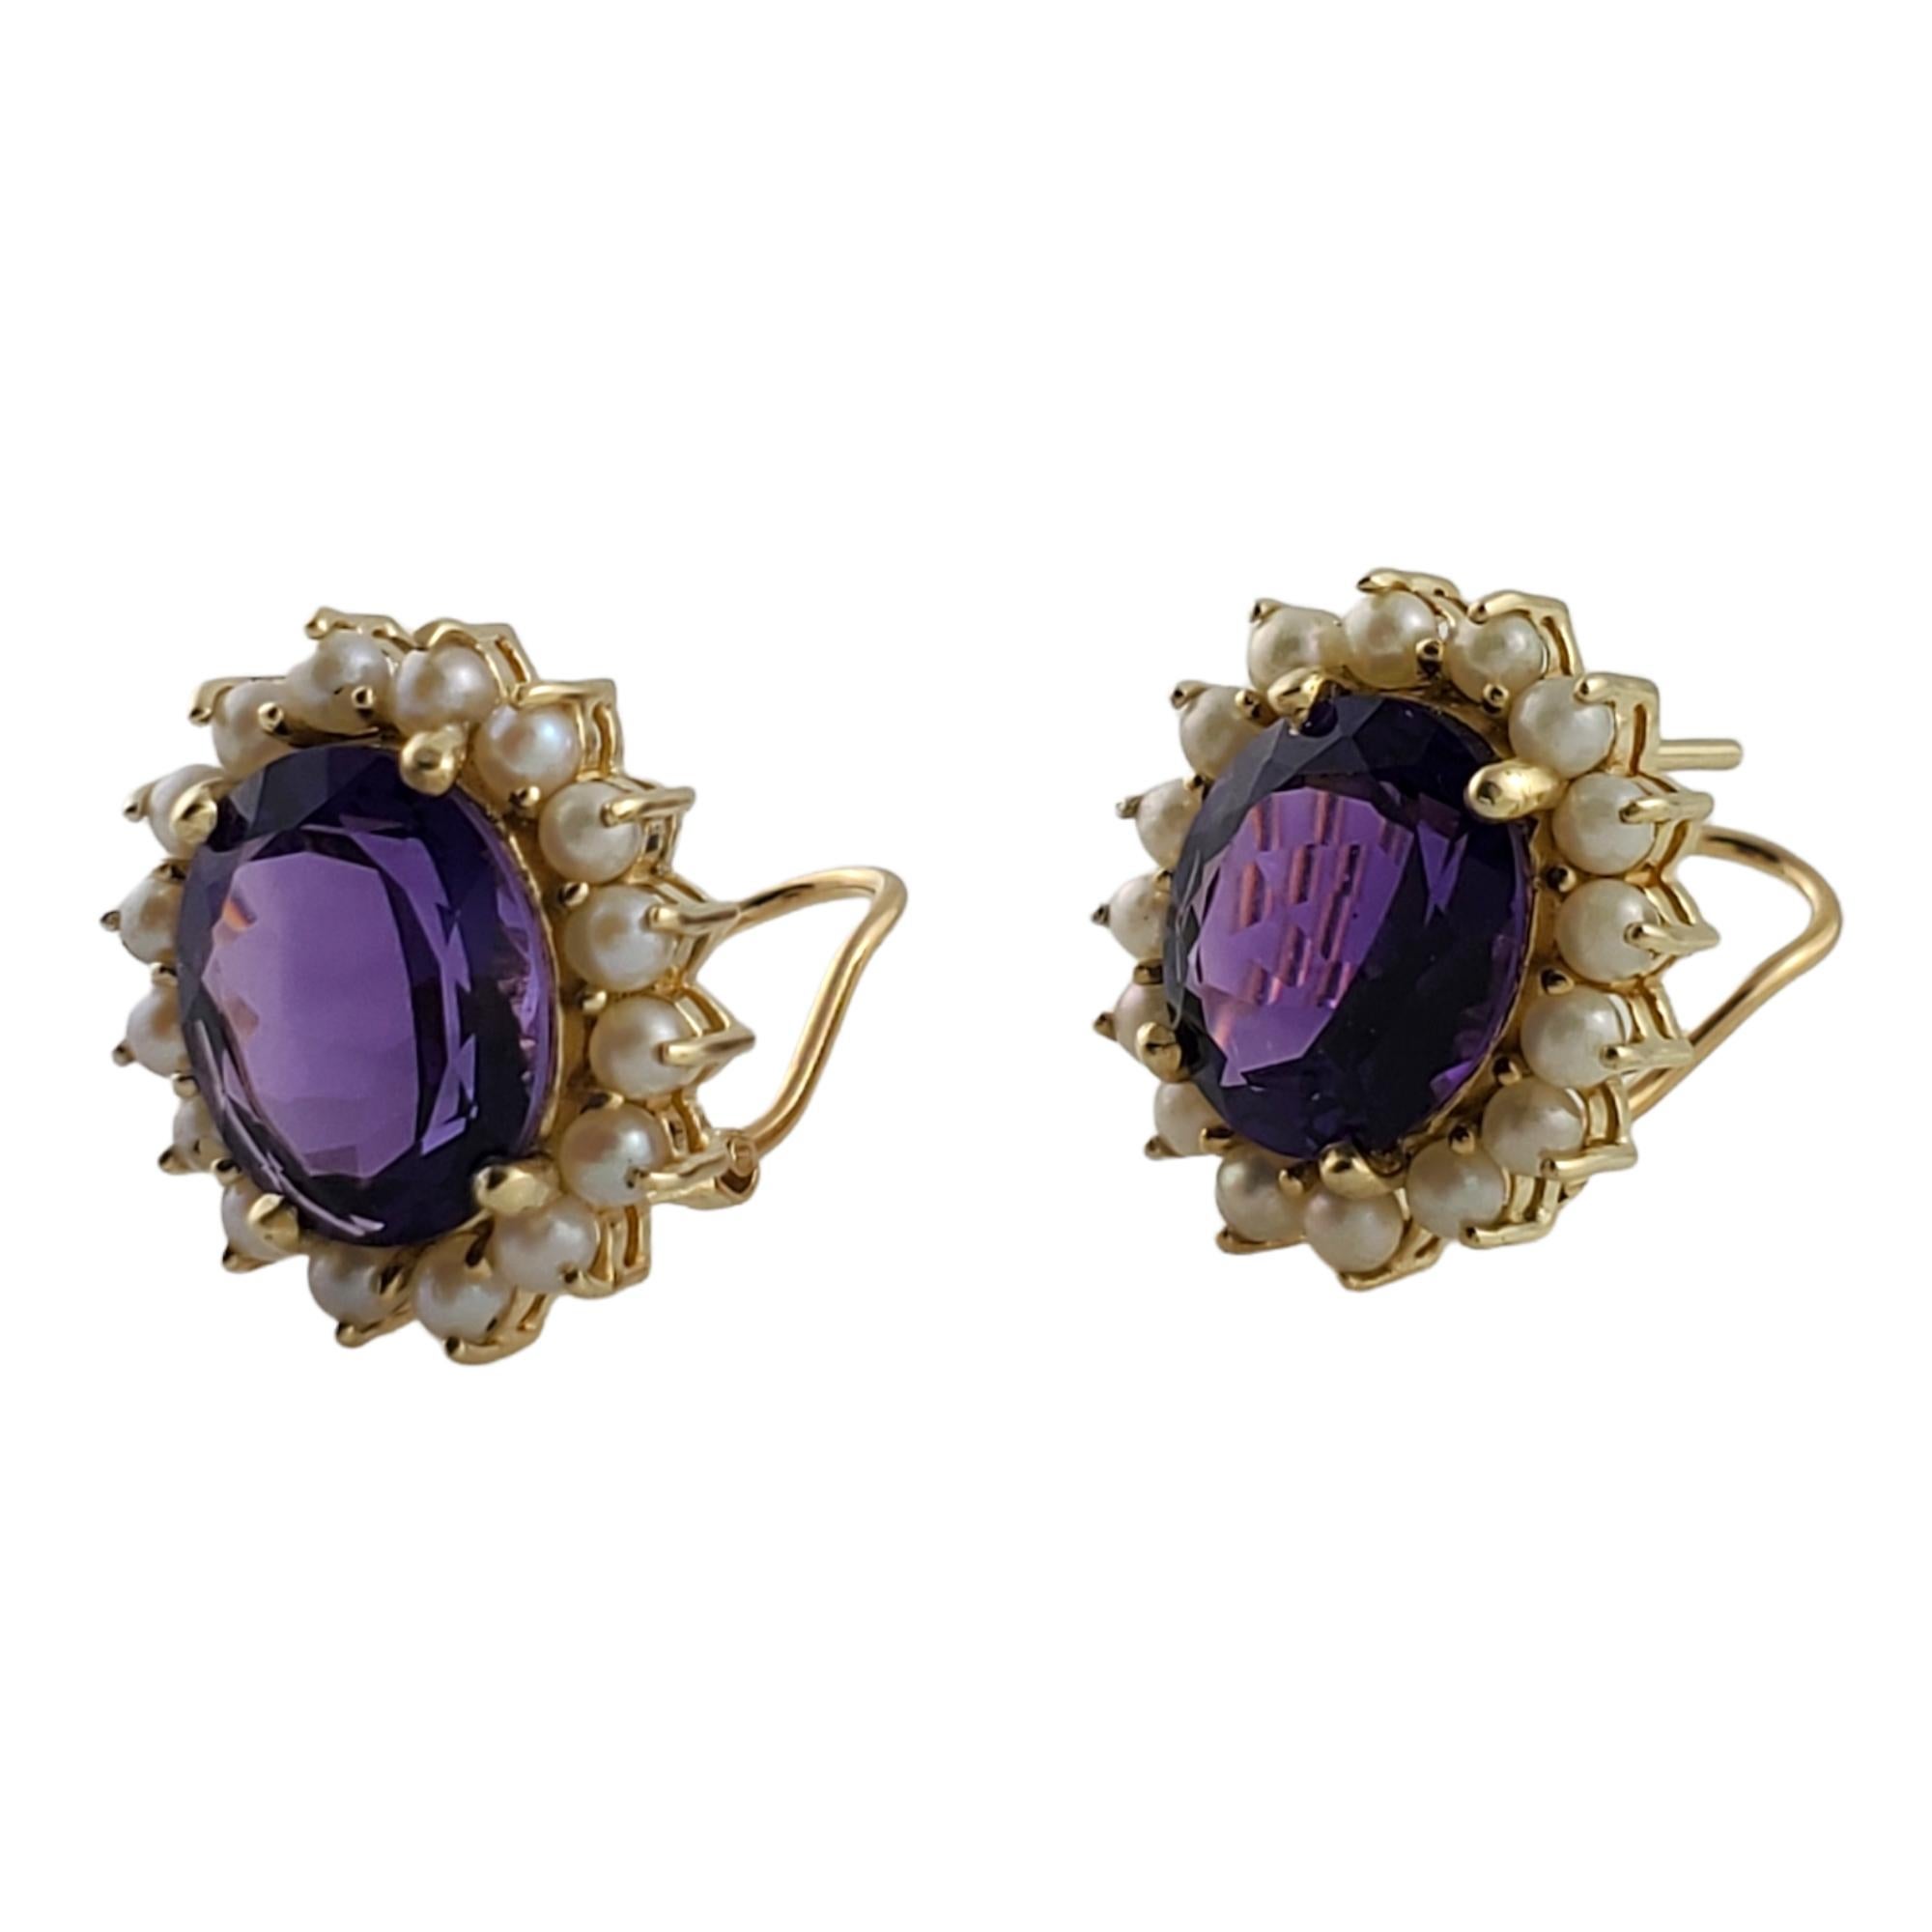 Gorgeous pair of yellow gold earrings featuring a 7 mm X 9 mm amethyst stone in the center surrounded by 16 pearls (on each earring).

Omega back closures.

Amethyst total weight: 7.36 ct.

Size: 13 mm X .mm

Weight: 8.5 g/ 5.4 dwt

Hallmark: 585